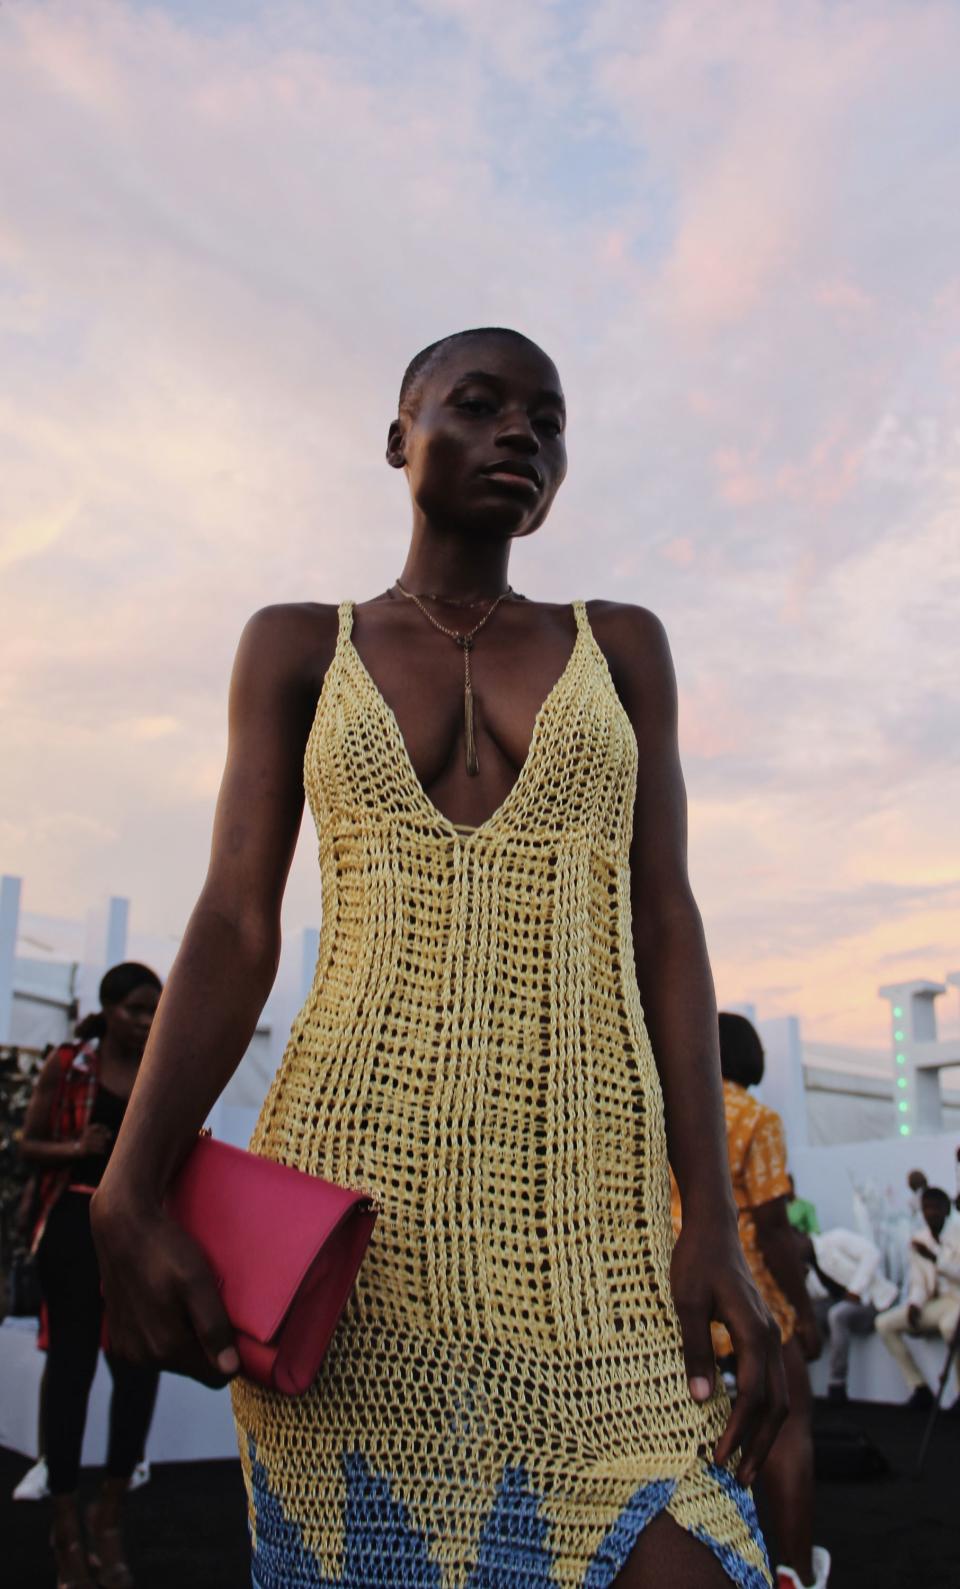 Fearless, colorful, and full of surprises, Nigeria’s style capital delivers some of the world’s best street fashion.